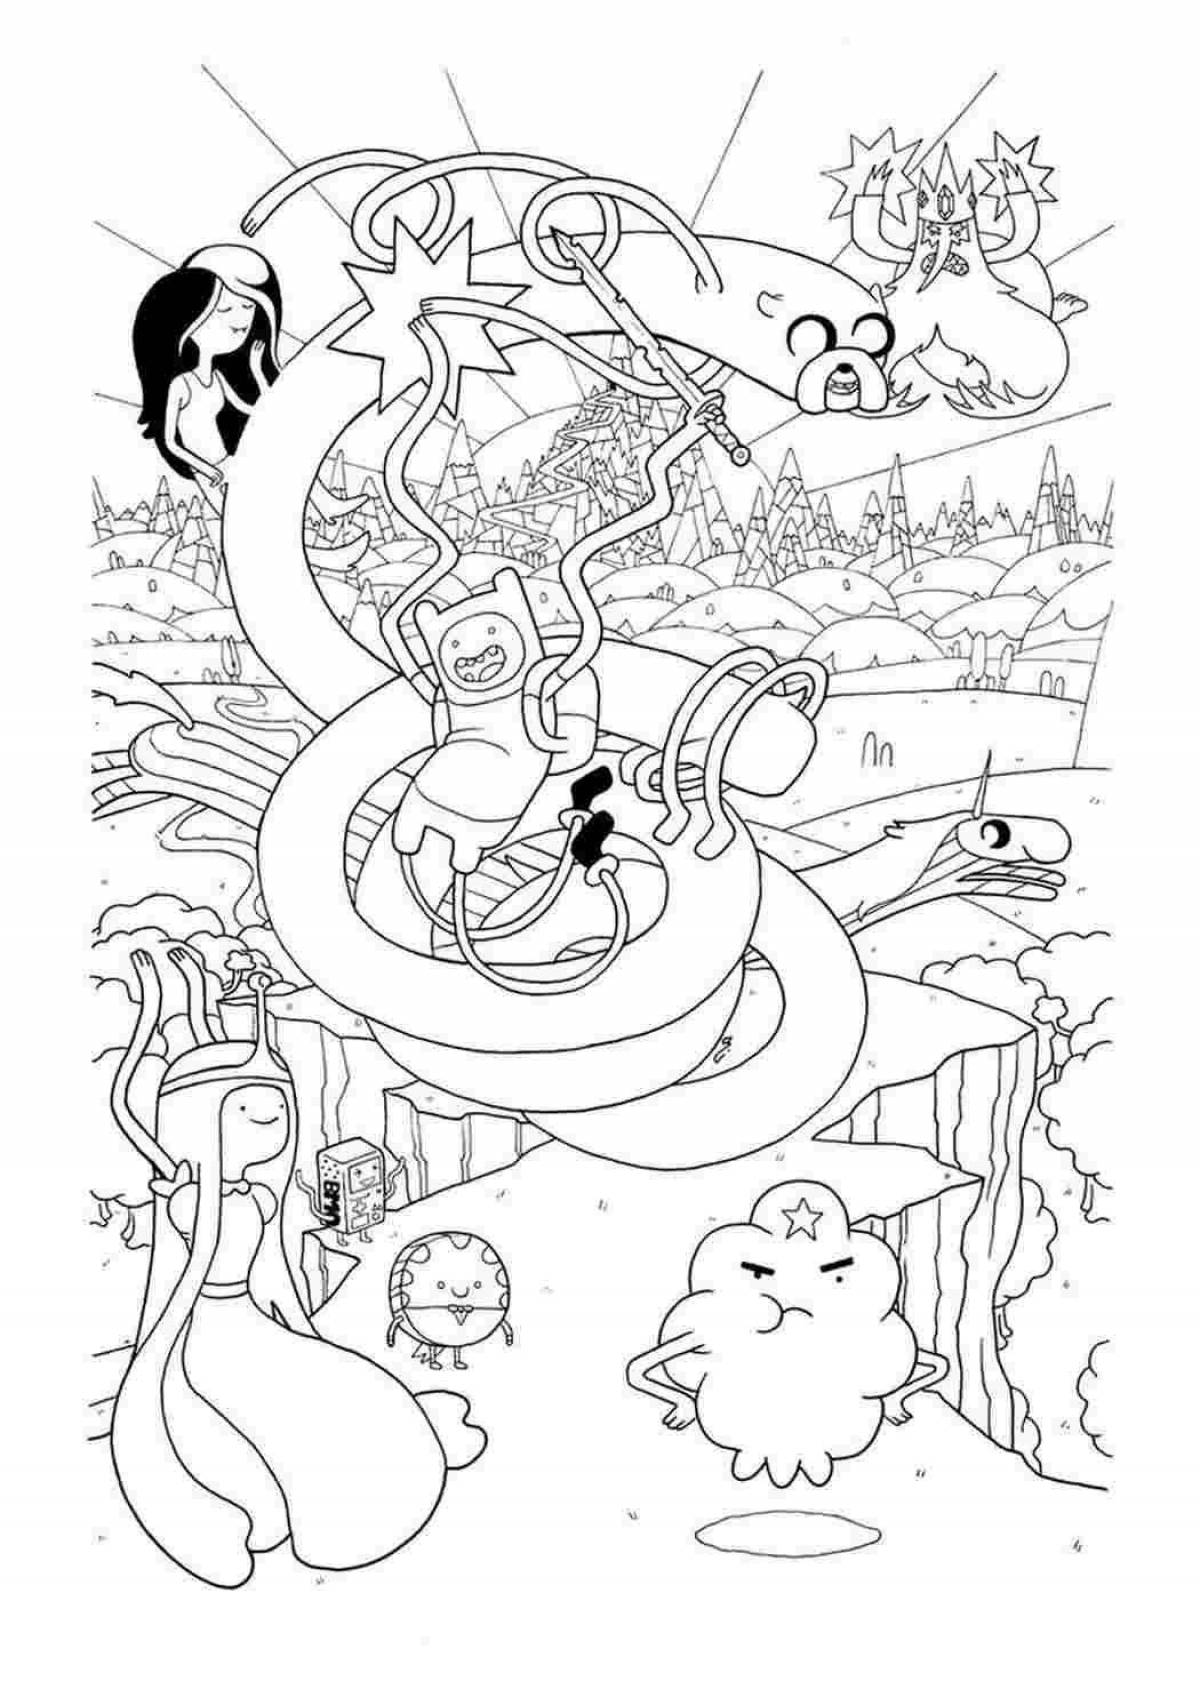 Playful time travel coloring page